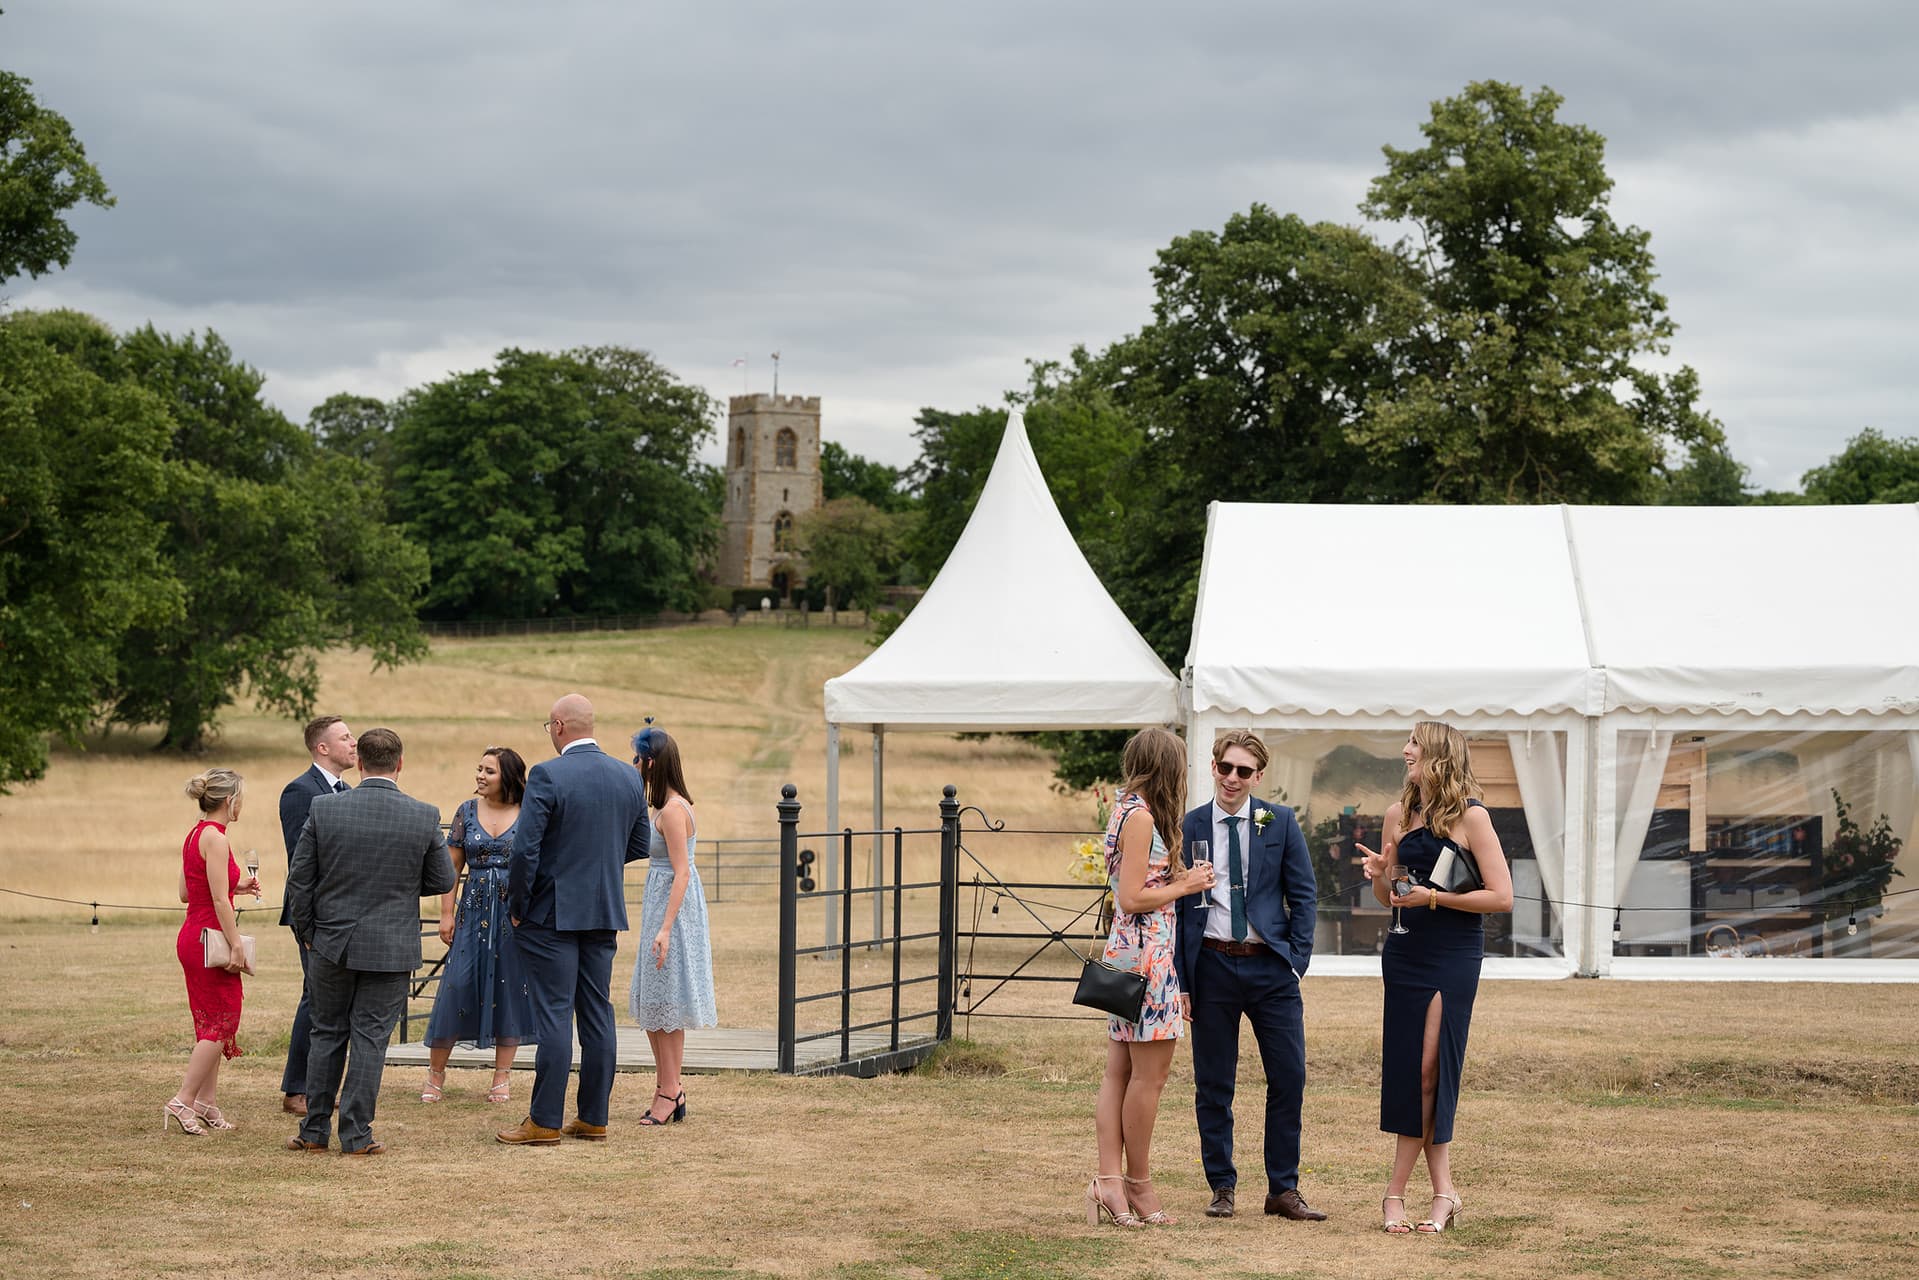 Guests chatting outside a wedding marquee with the church in the background